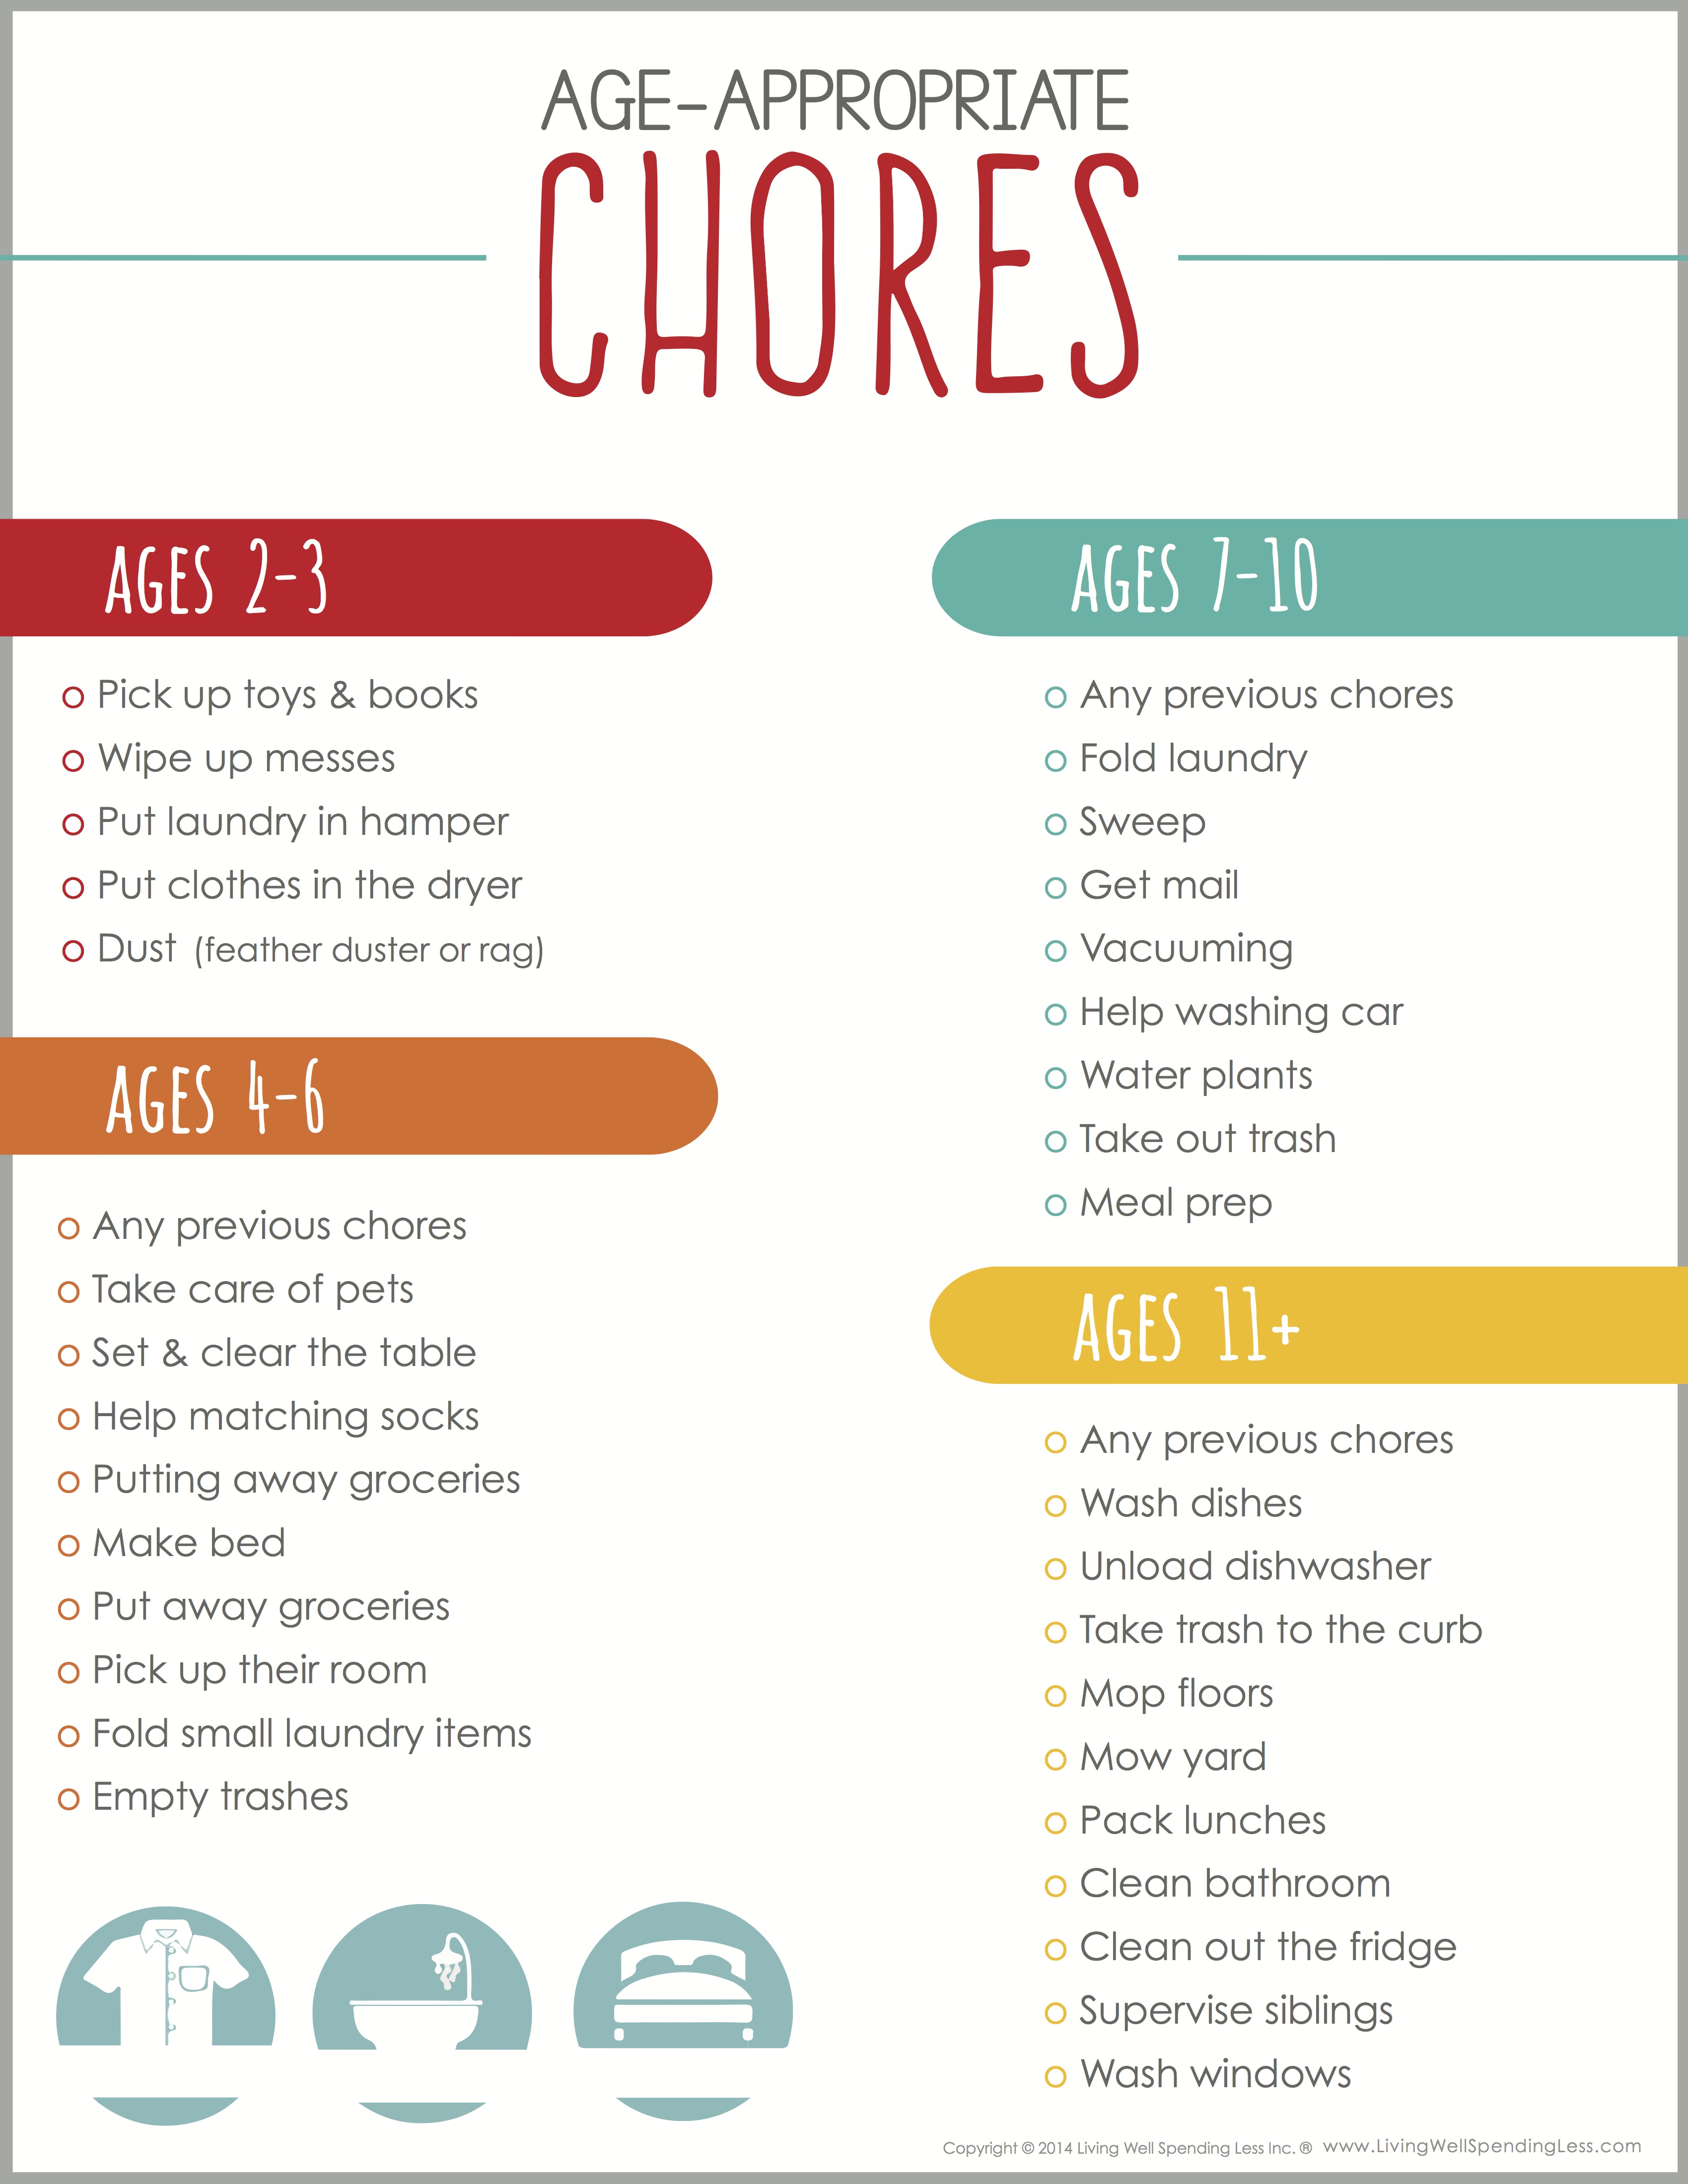 How Do I Make A Chore Chart For My Child